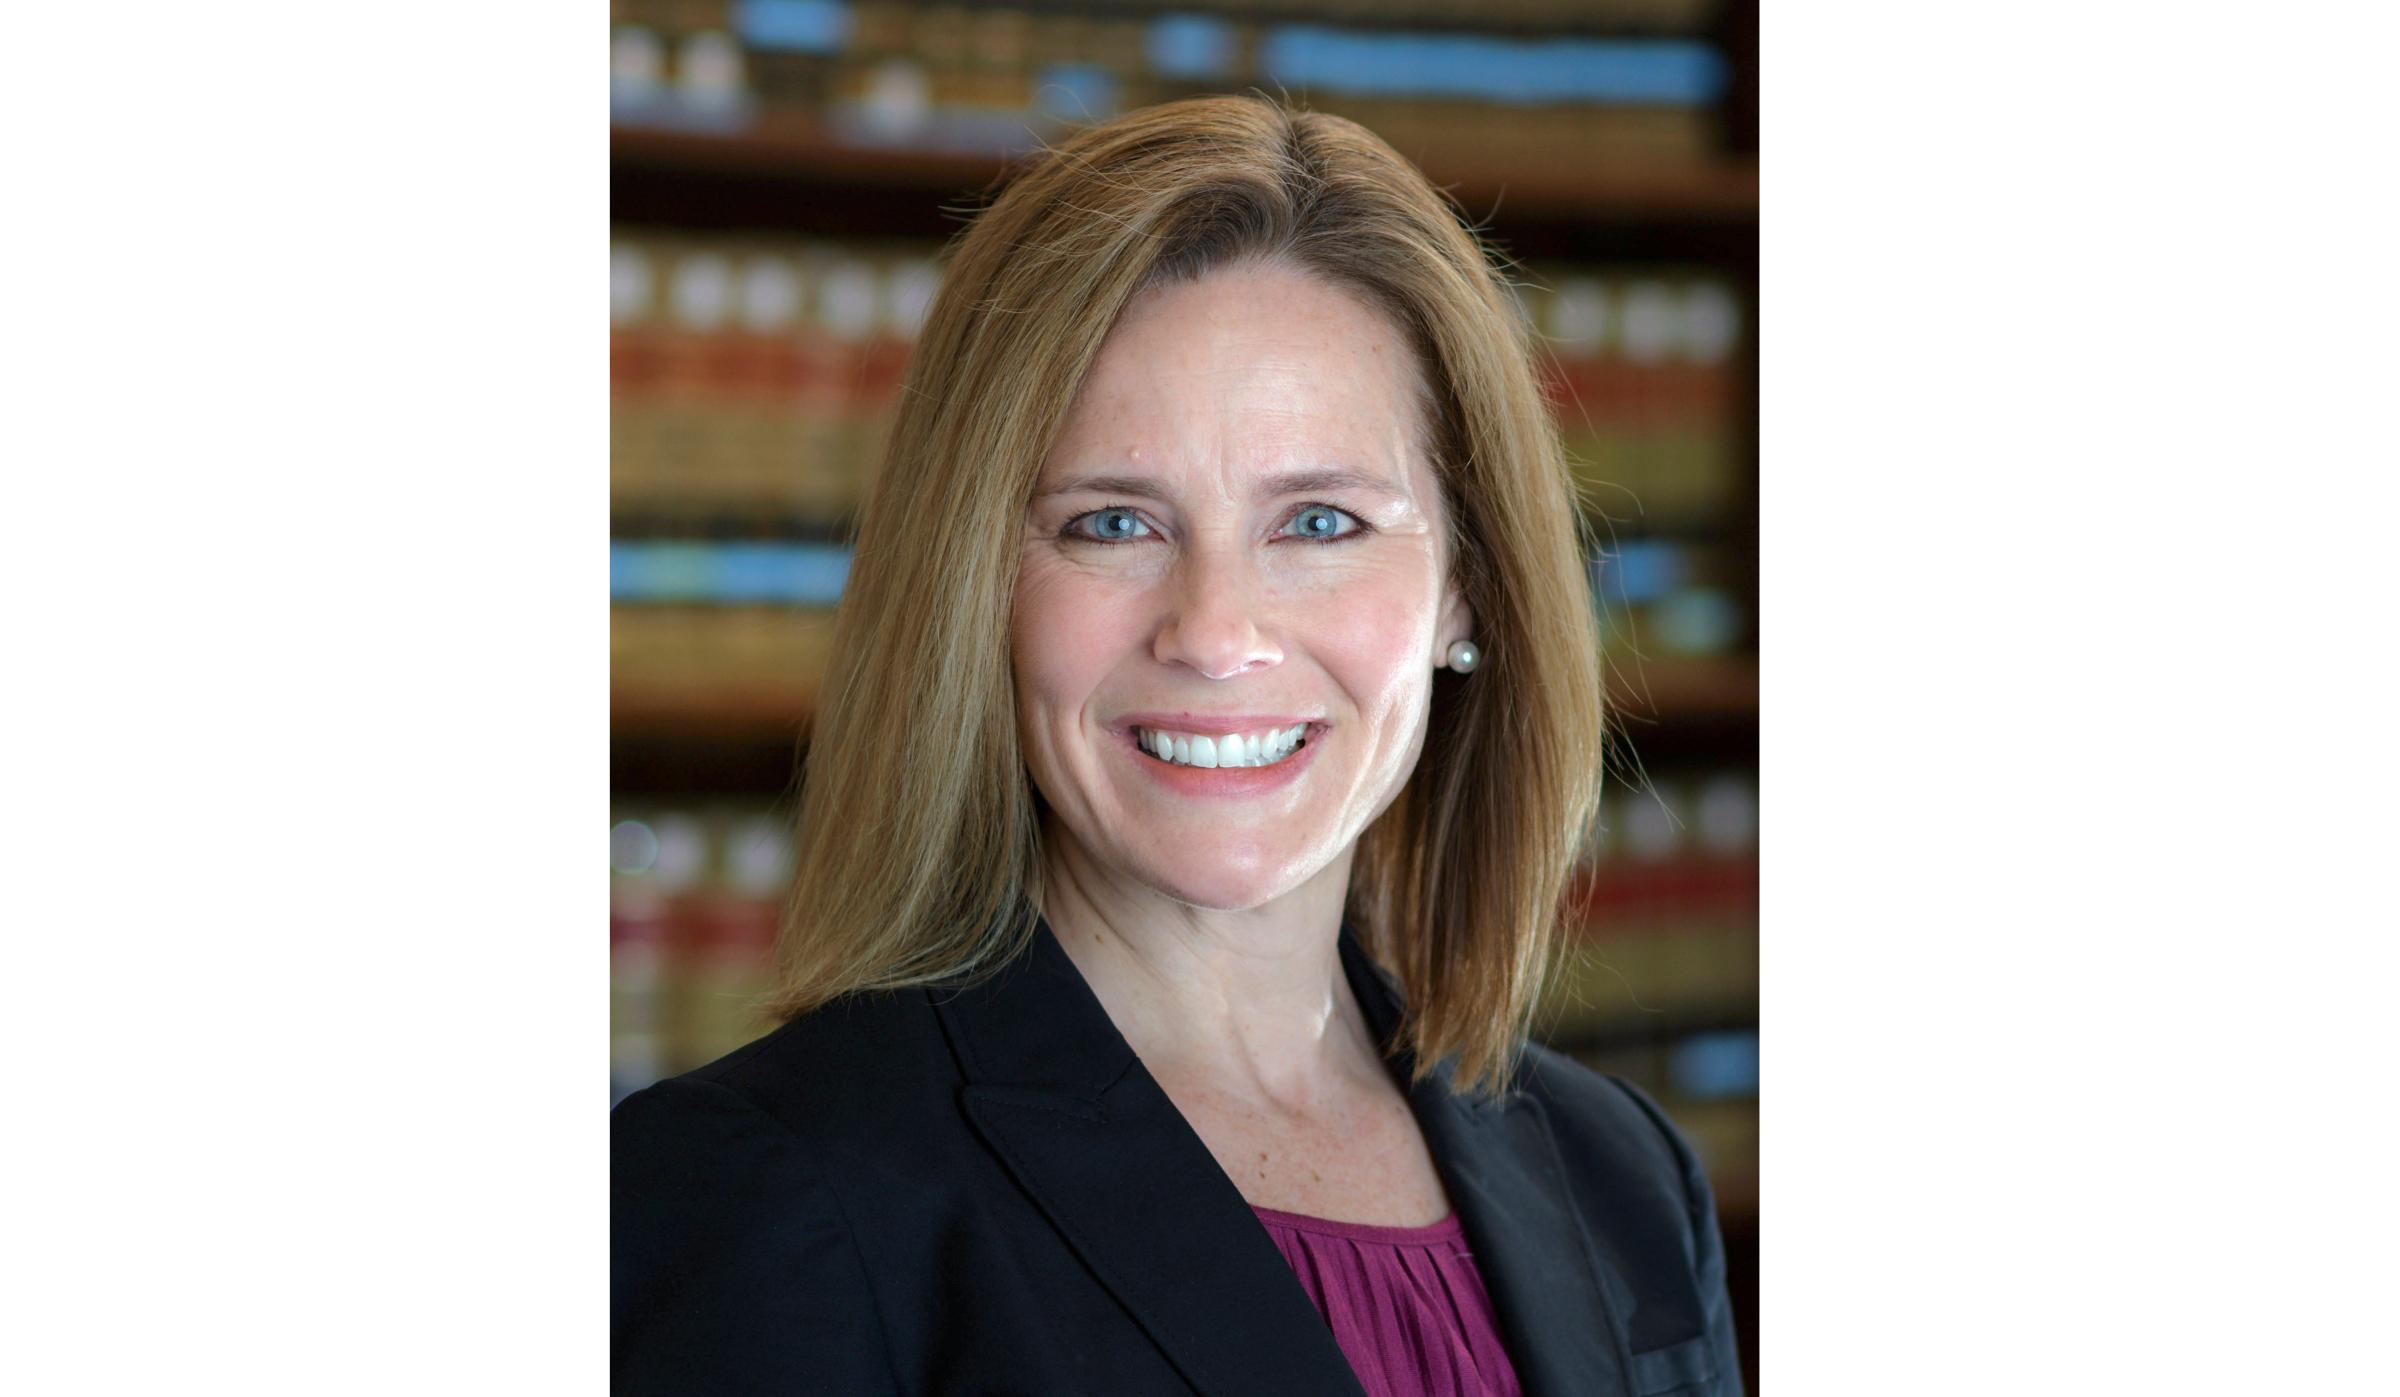 A headshot of Judge Amy Comey Barrett smiling at the camera